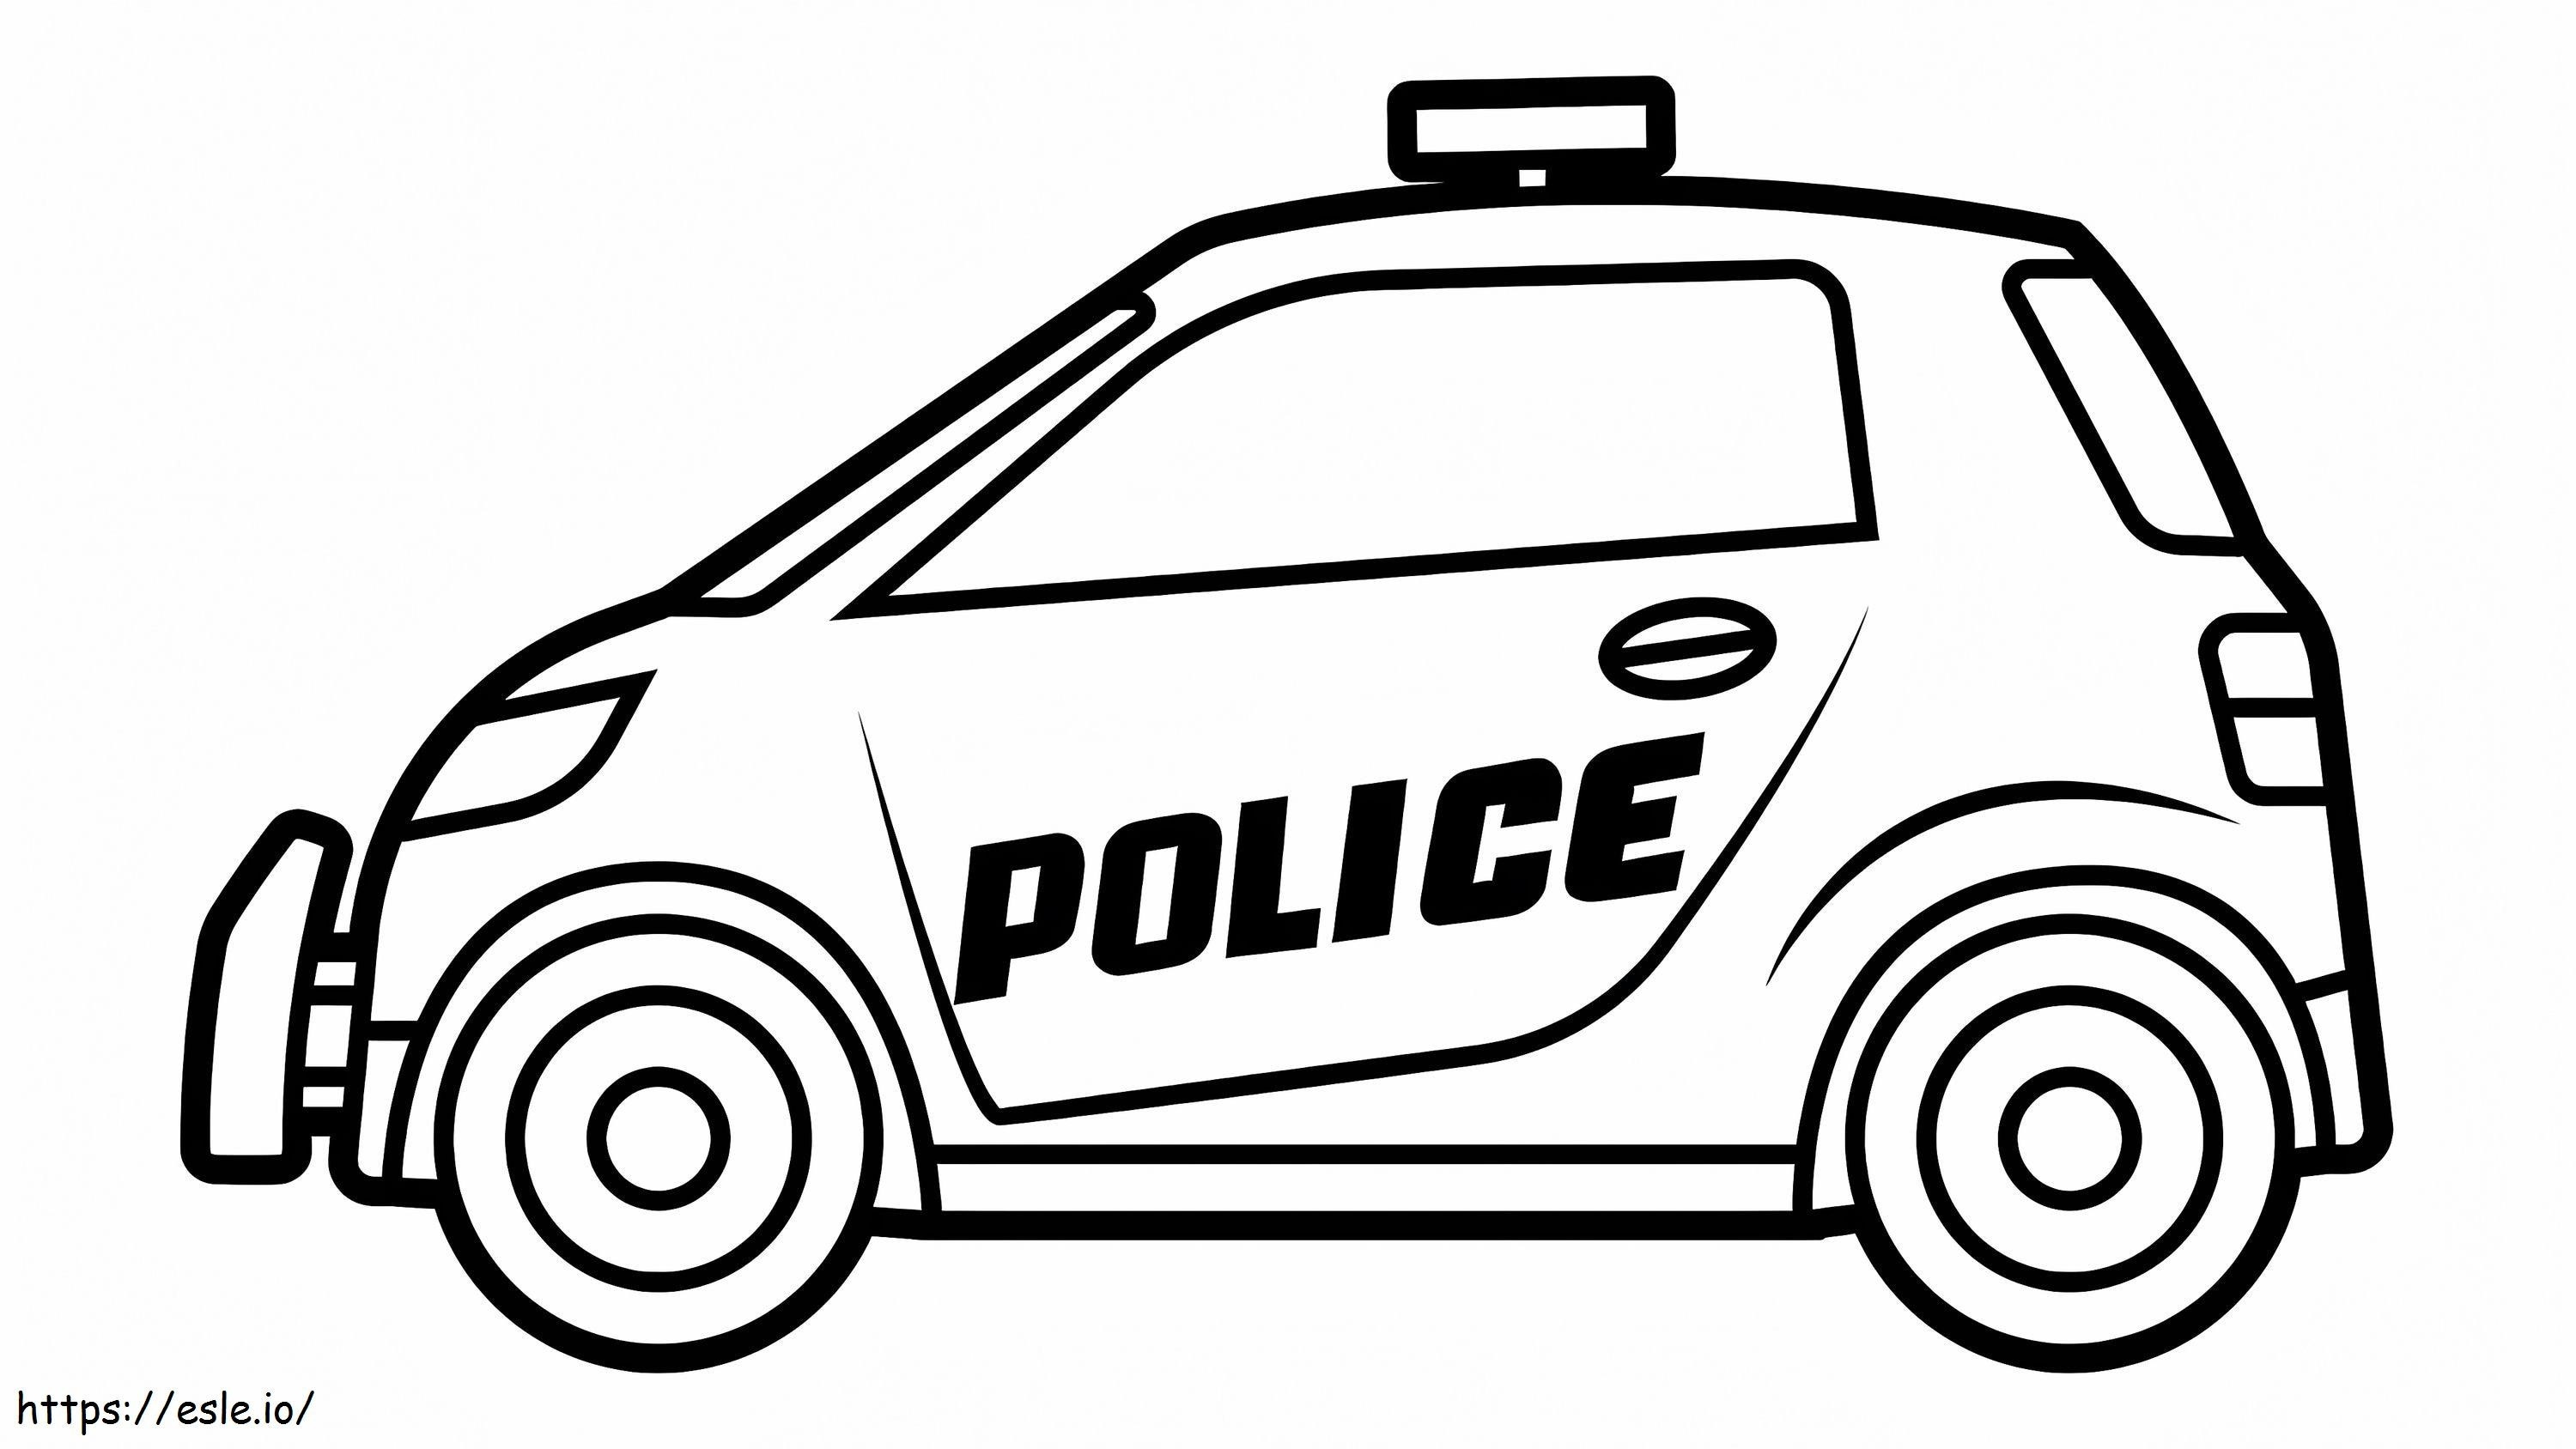 Police Car 2 coloring page